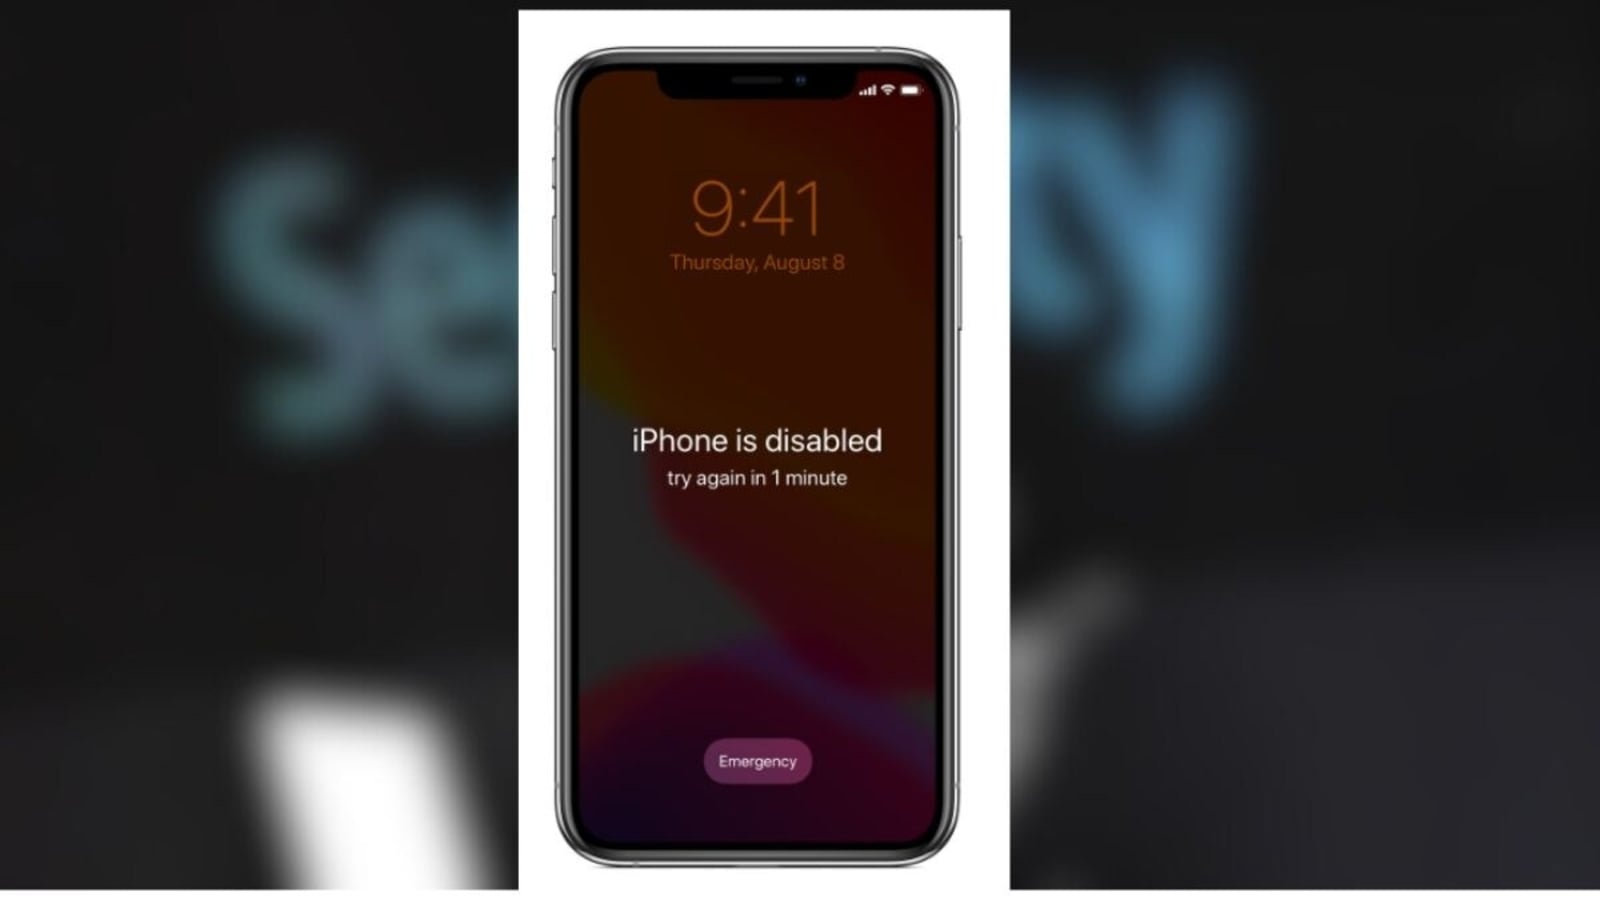 Locked out of your iPhone? Know how to unlock it without passcode | How-to